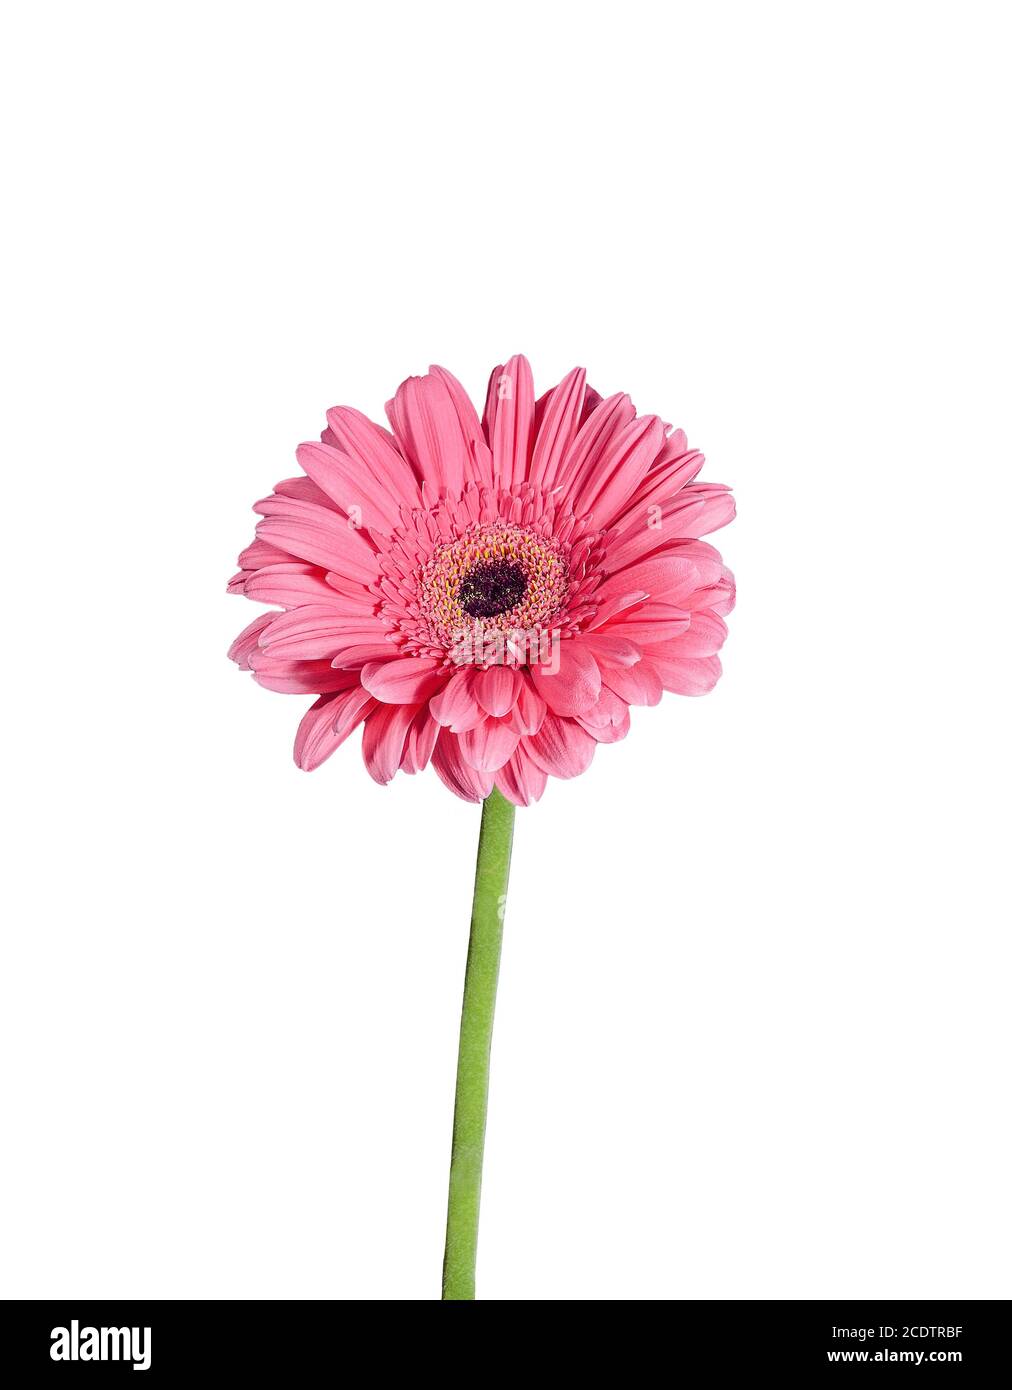 Pink Gerbera flower close up, isolated on a white background Stock Photo